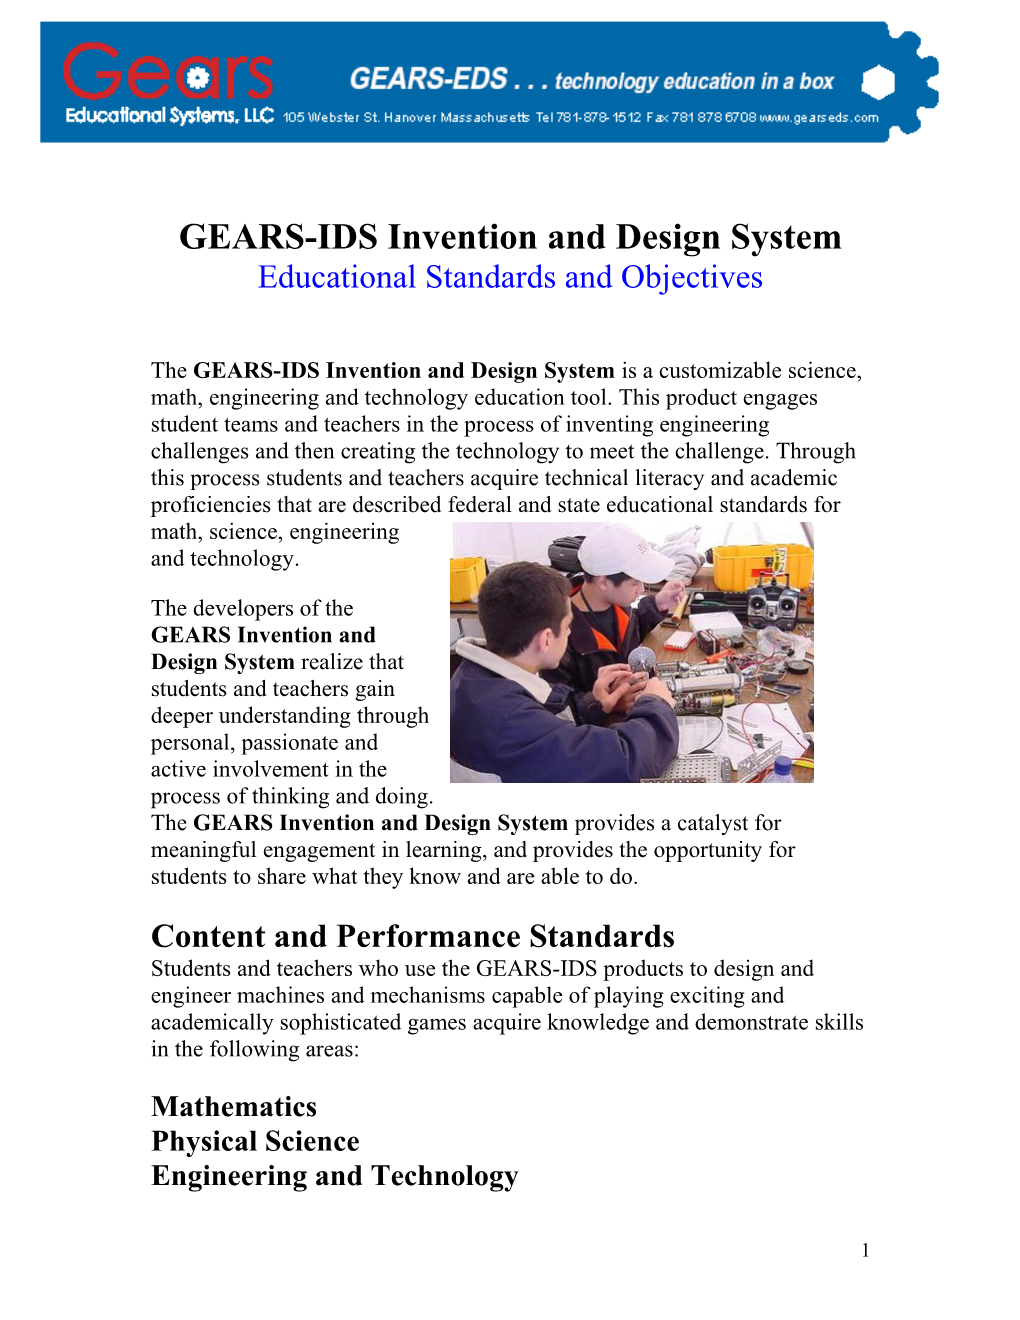 GEARS-IDS Invention and Design System